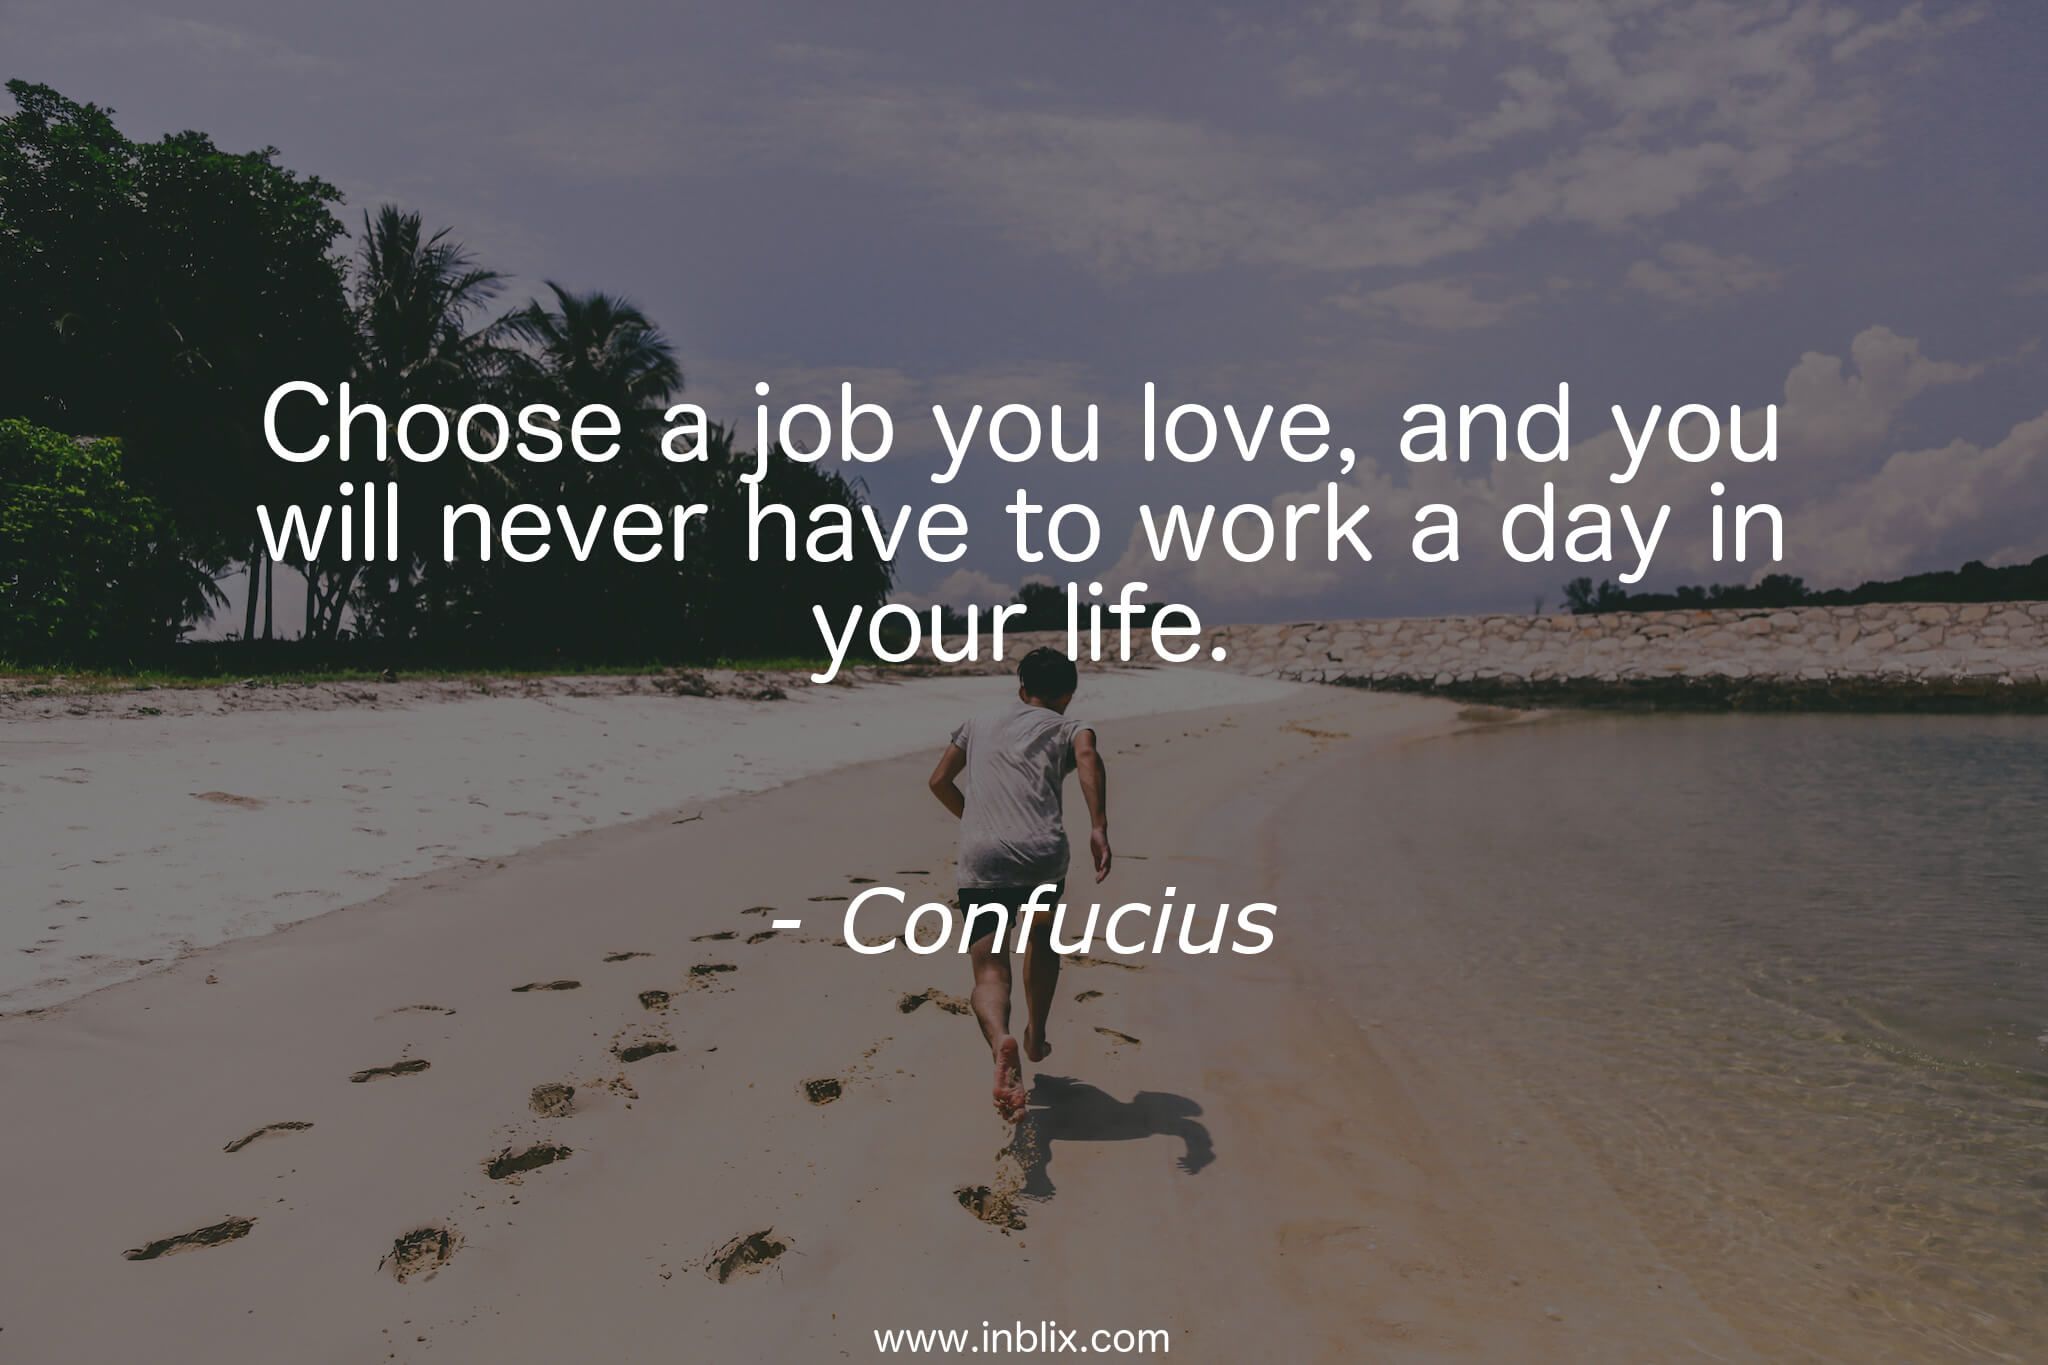 Want to have my life. Choose a job you Love, and you will never have to work a Day in your Life. Choose a job you Love. Day in your Life. You will never.